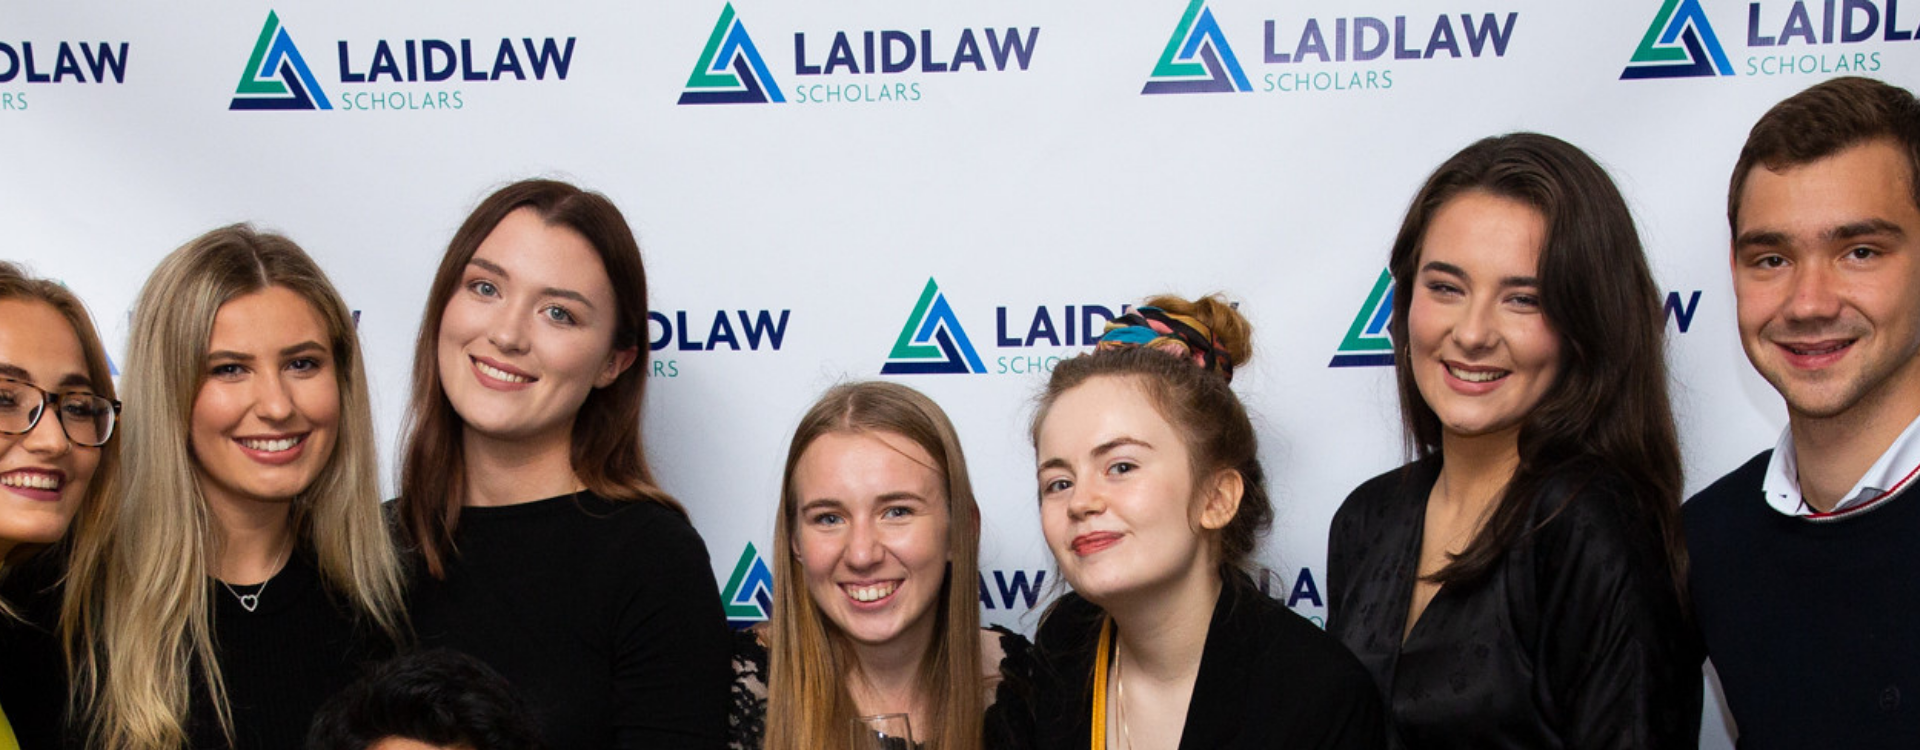 Group of Laidlaw Scholars